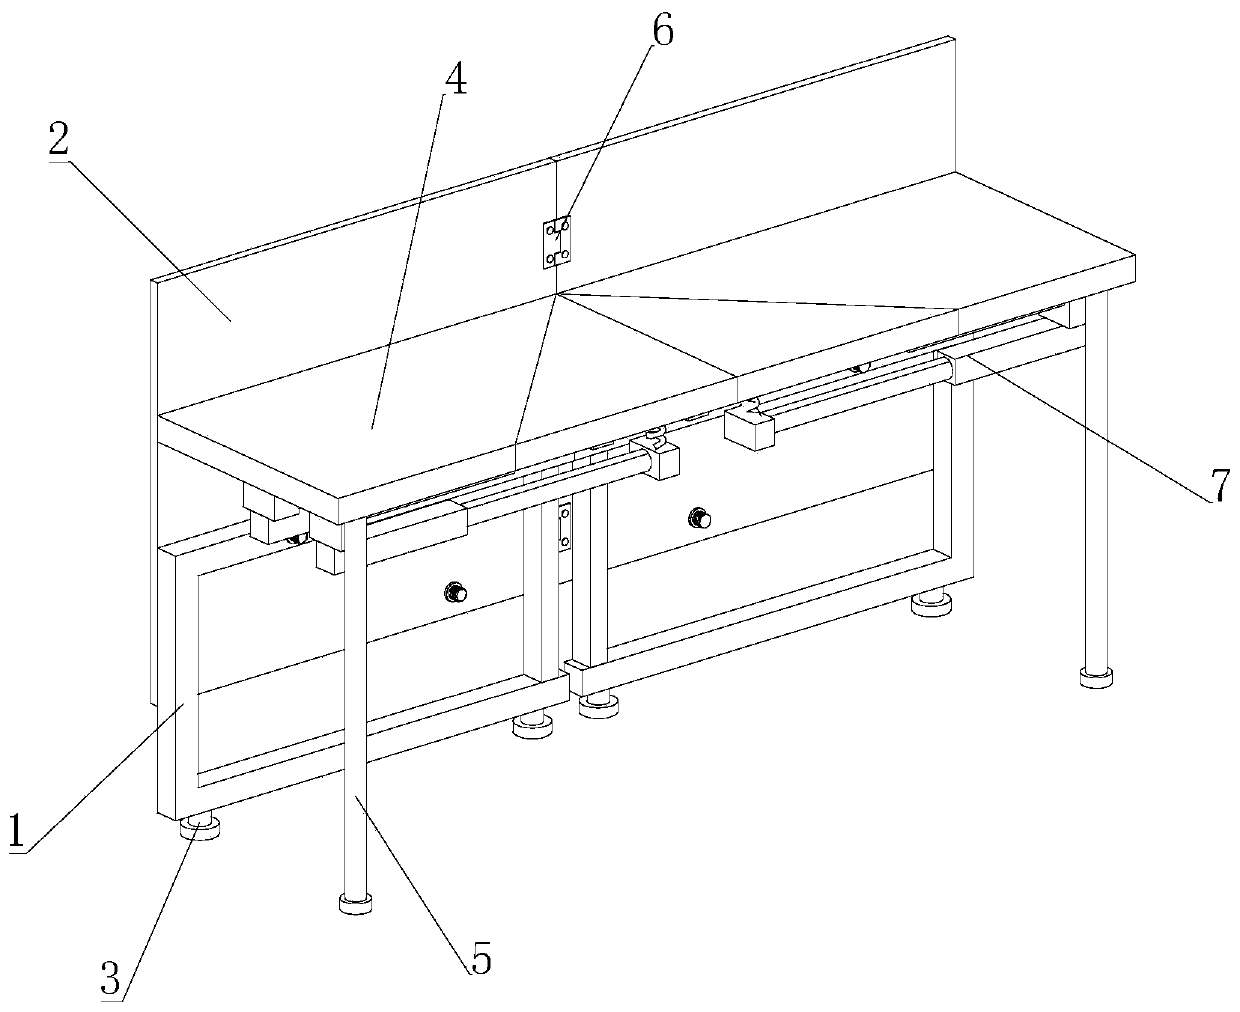 Foldable and transformable combined office table